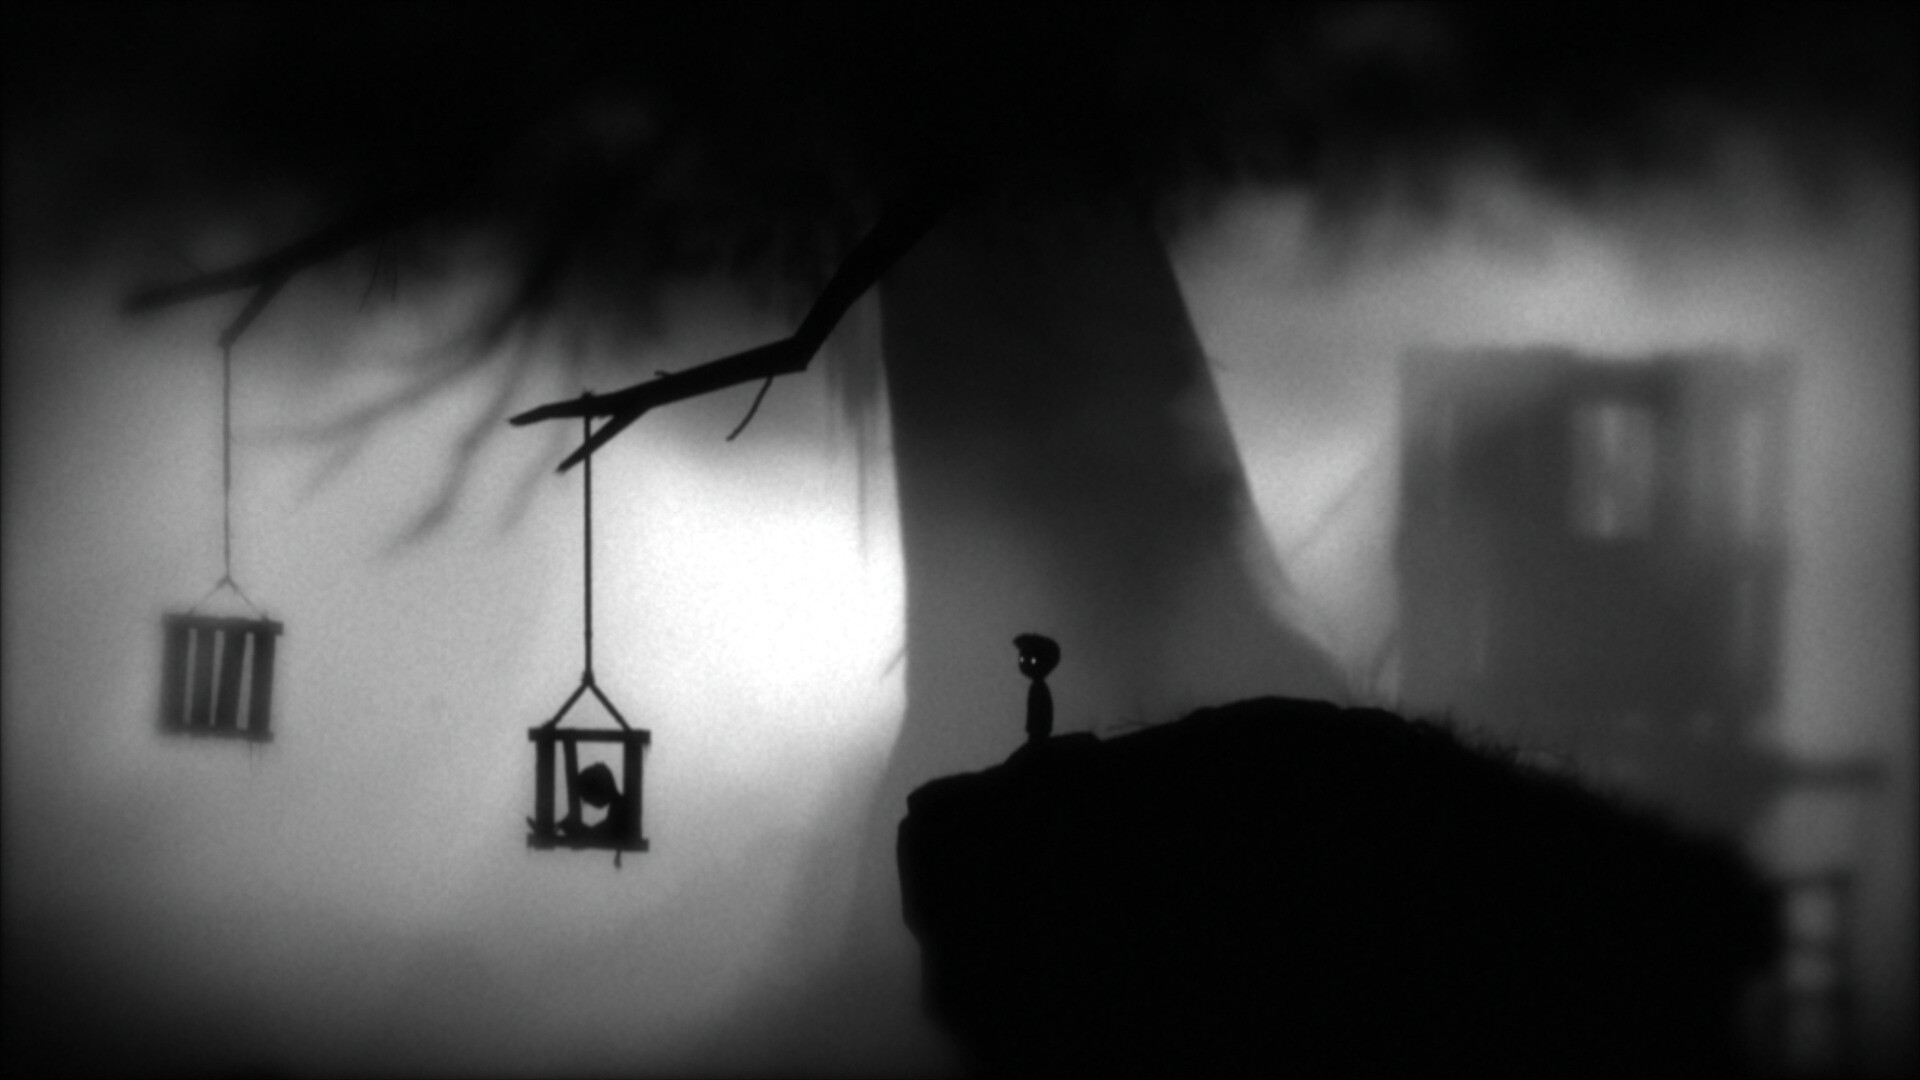 Limbo: As the player will likely encounter numerous deaths before they solve each puzzle and complete the game, the developers call it a "trial and death" game. 1920x1080 Full HD Wallpaper.